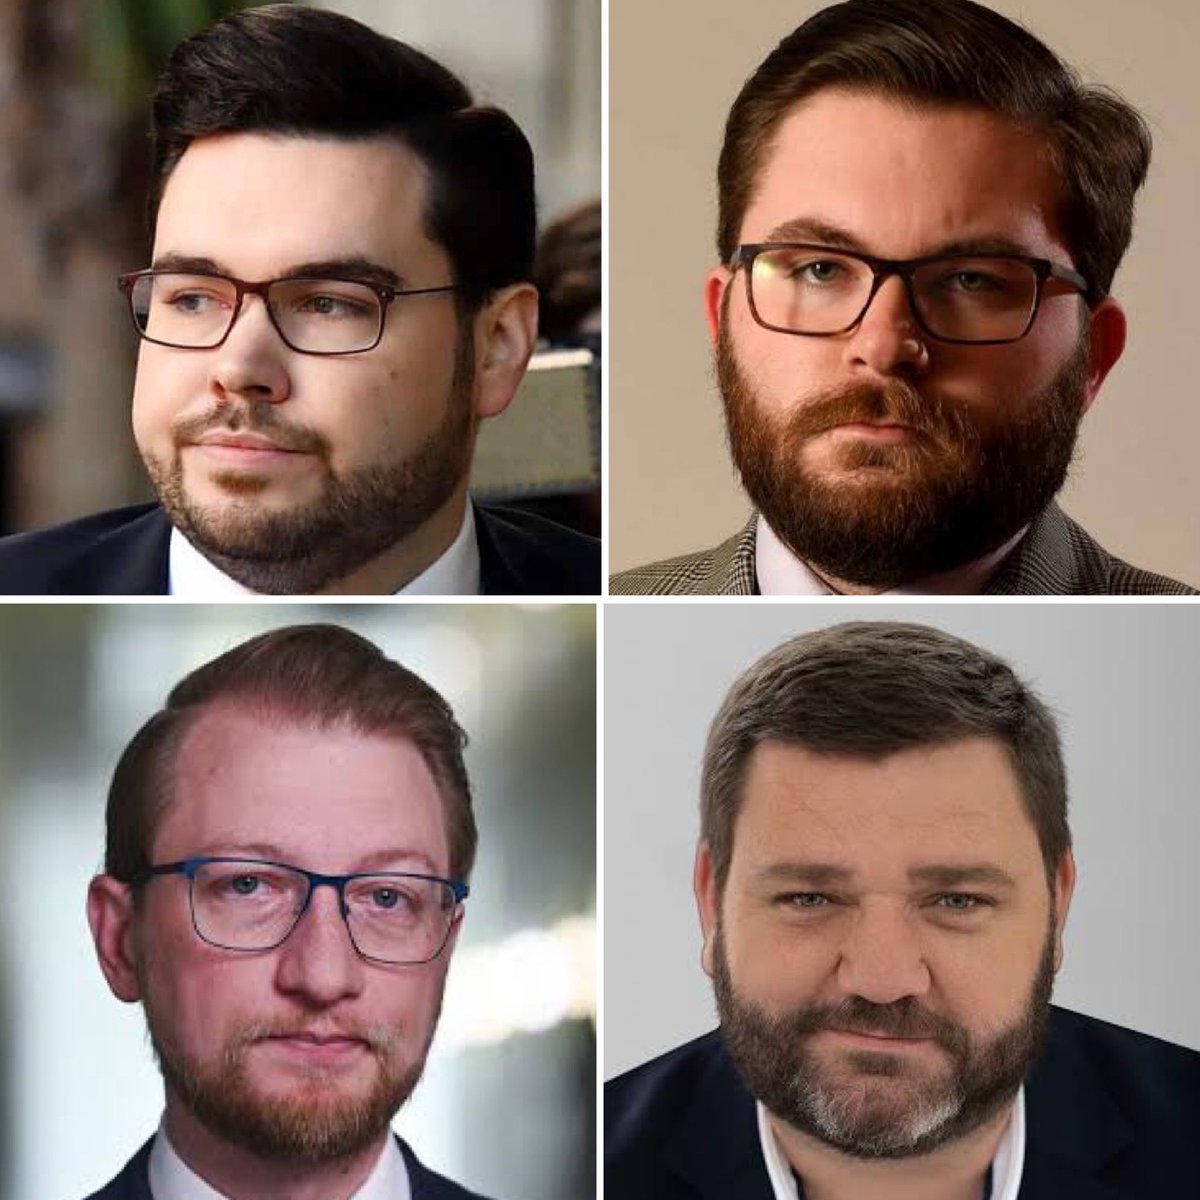 Is there a fascist incubator, or bearded dimwit factory, perhaps somewhere in far north Queensland, that assembles, then releases into our politics imbeciles like this quartet of clowns? #auspol #LNPGrubs #LNPFascists #LNPNeverAgain